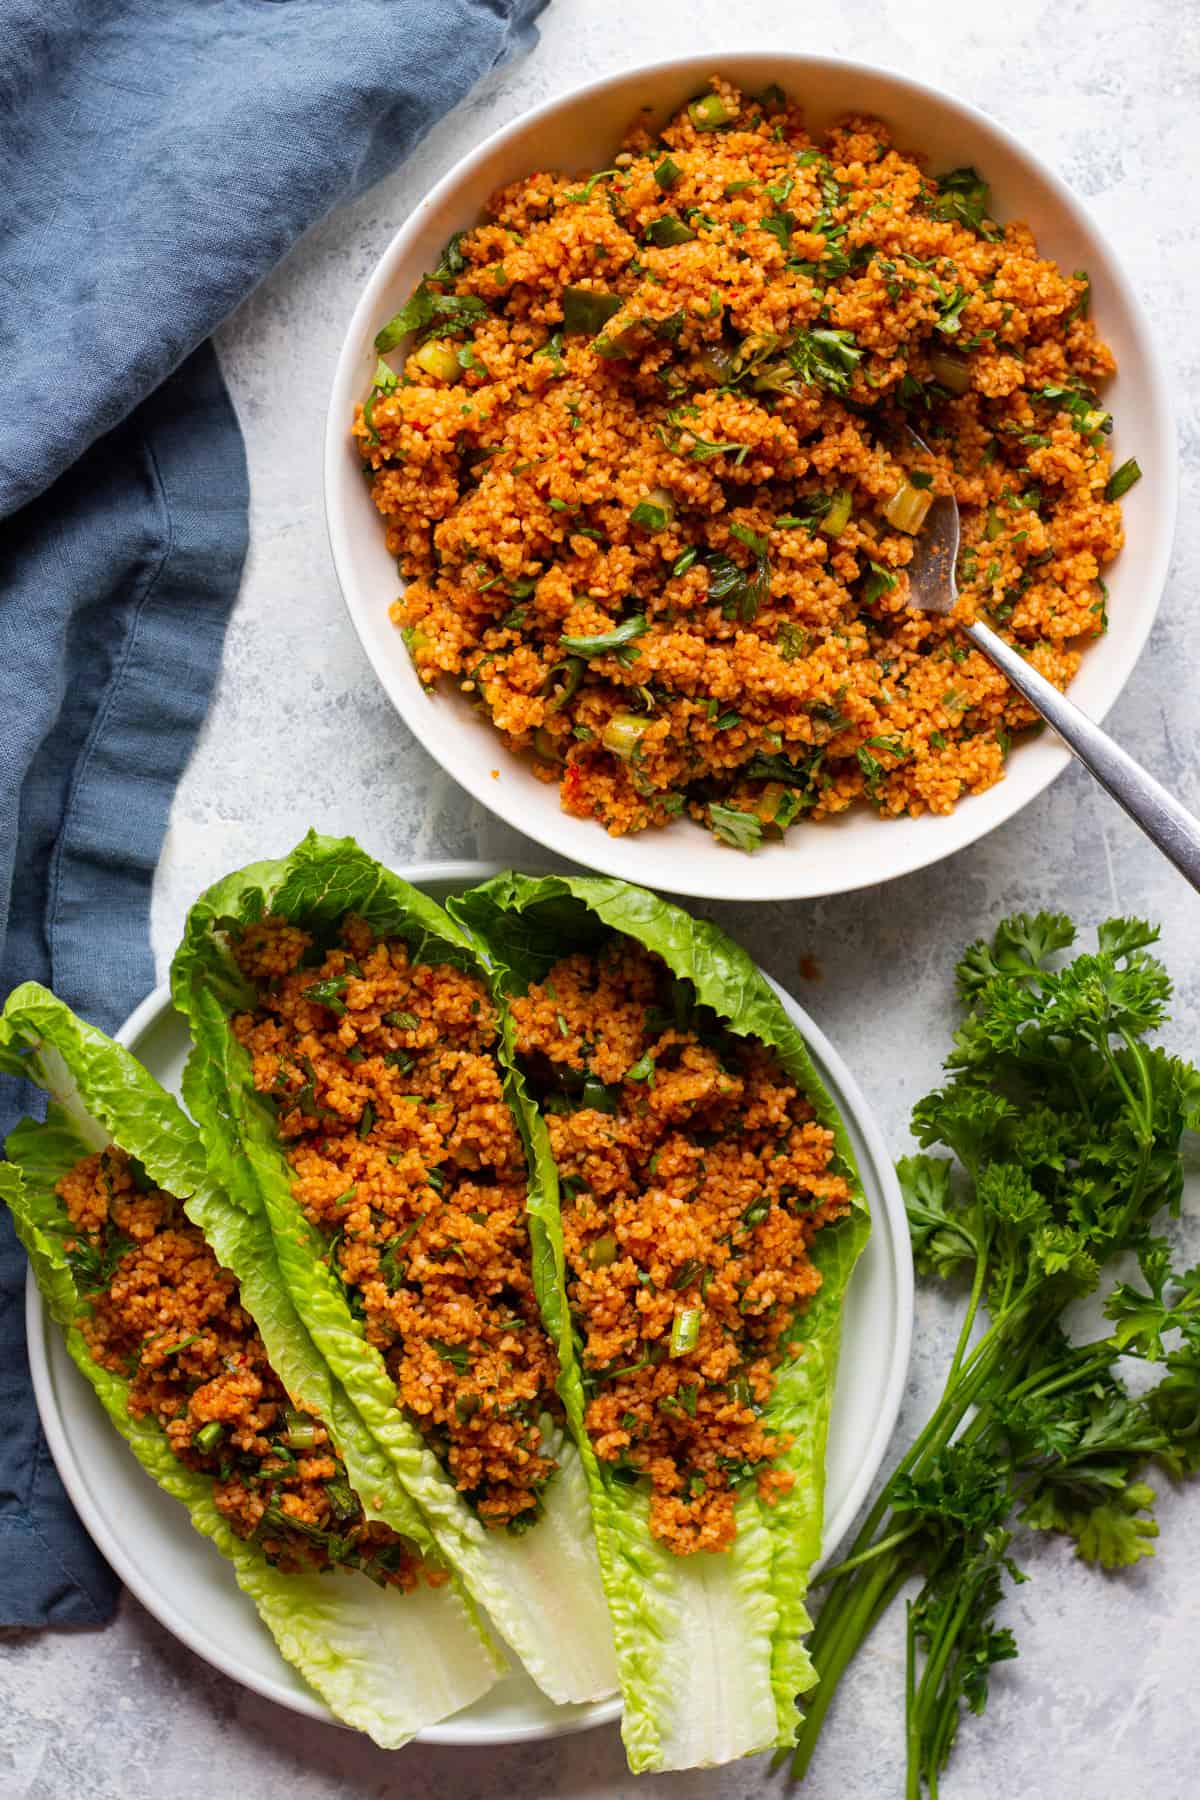 An easy bulgur salad recipe that's perfect for any day. Made with bulgur, olive oil and herbs, this salad in ready in less than 30 minutes!
